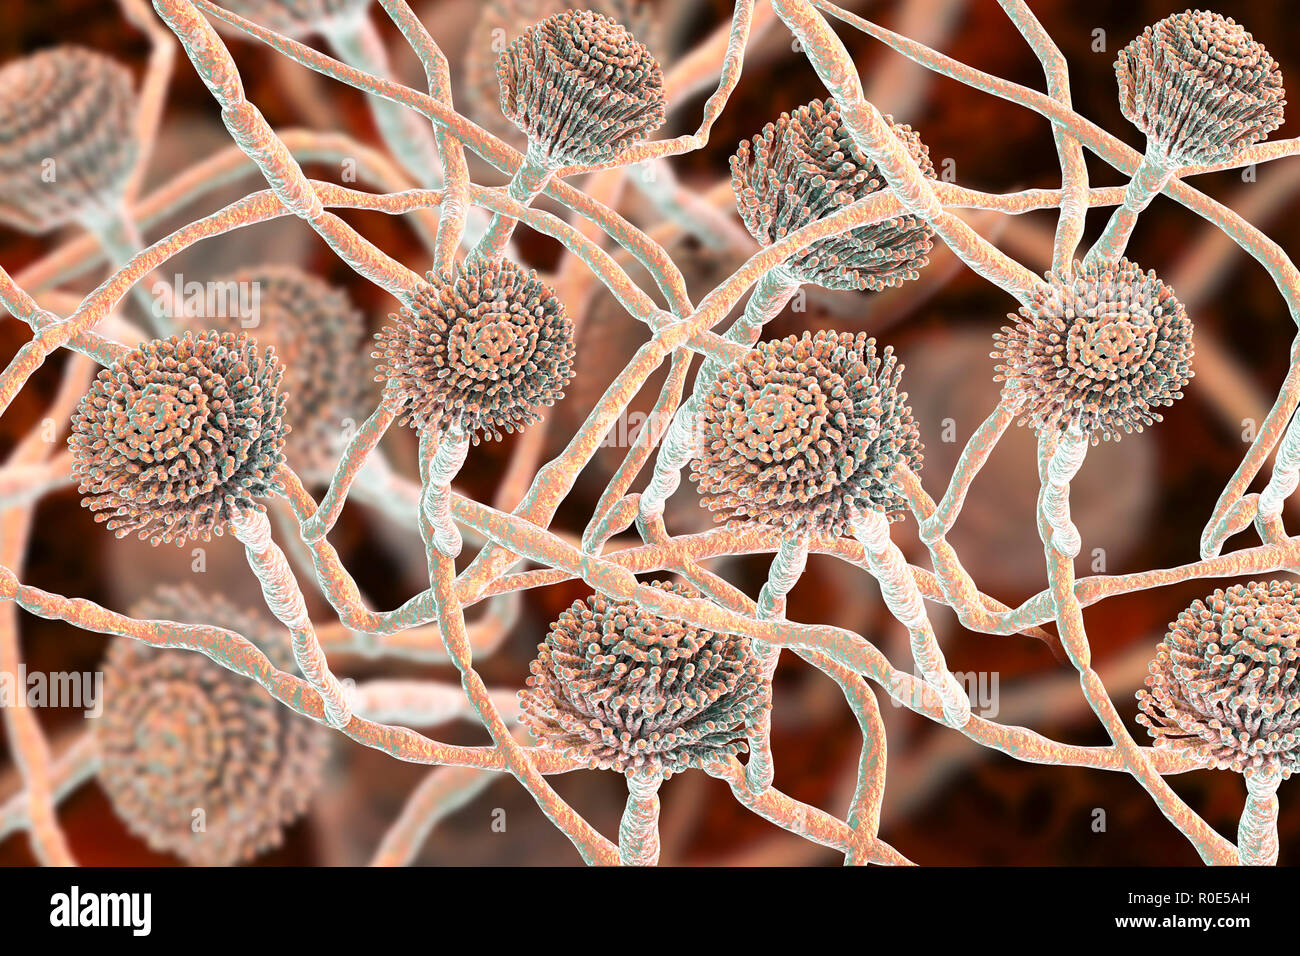 Computer illustration of fruiting bodies (conidiophores) and hyphae of the fungus Aspergillus fumigatus. A. fumigatus is a widely distributed saprophyte which grows on household dust, soil, and decaying vegetable matter, including stale food, hay and grain. Humans and animals constantly inhale numerous conidia of this fungus. A. fumigatus can cause a number of disorders in people with compromised immune function or other lung diseases, including allergy and the serious lung disease aspergillosis. This fungus can also spread to the brain, kidneys, liver and skin. Stock Photo